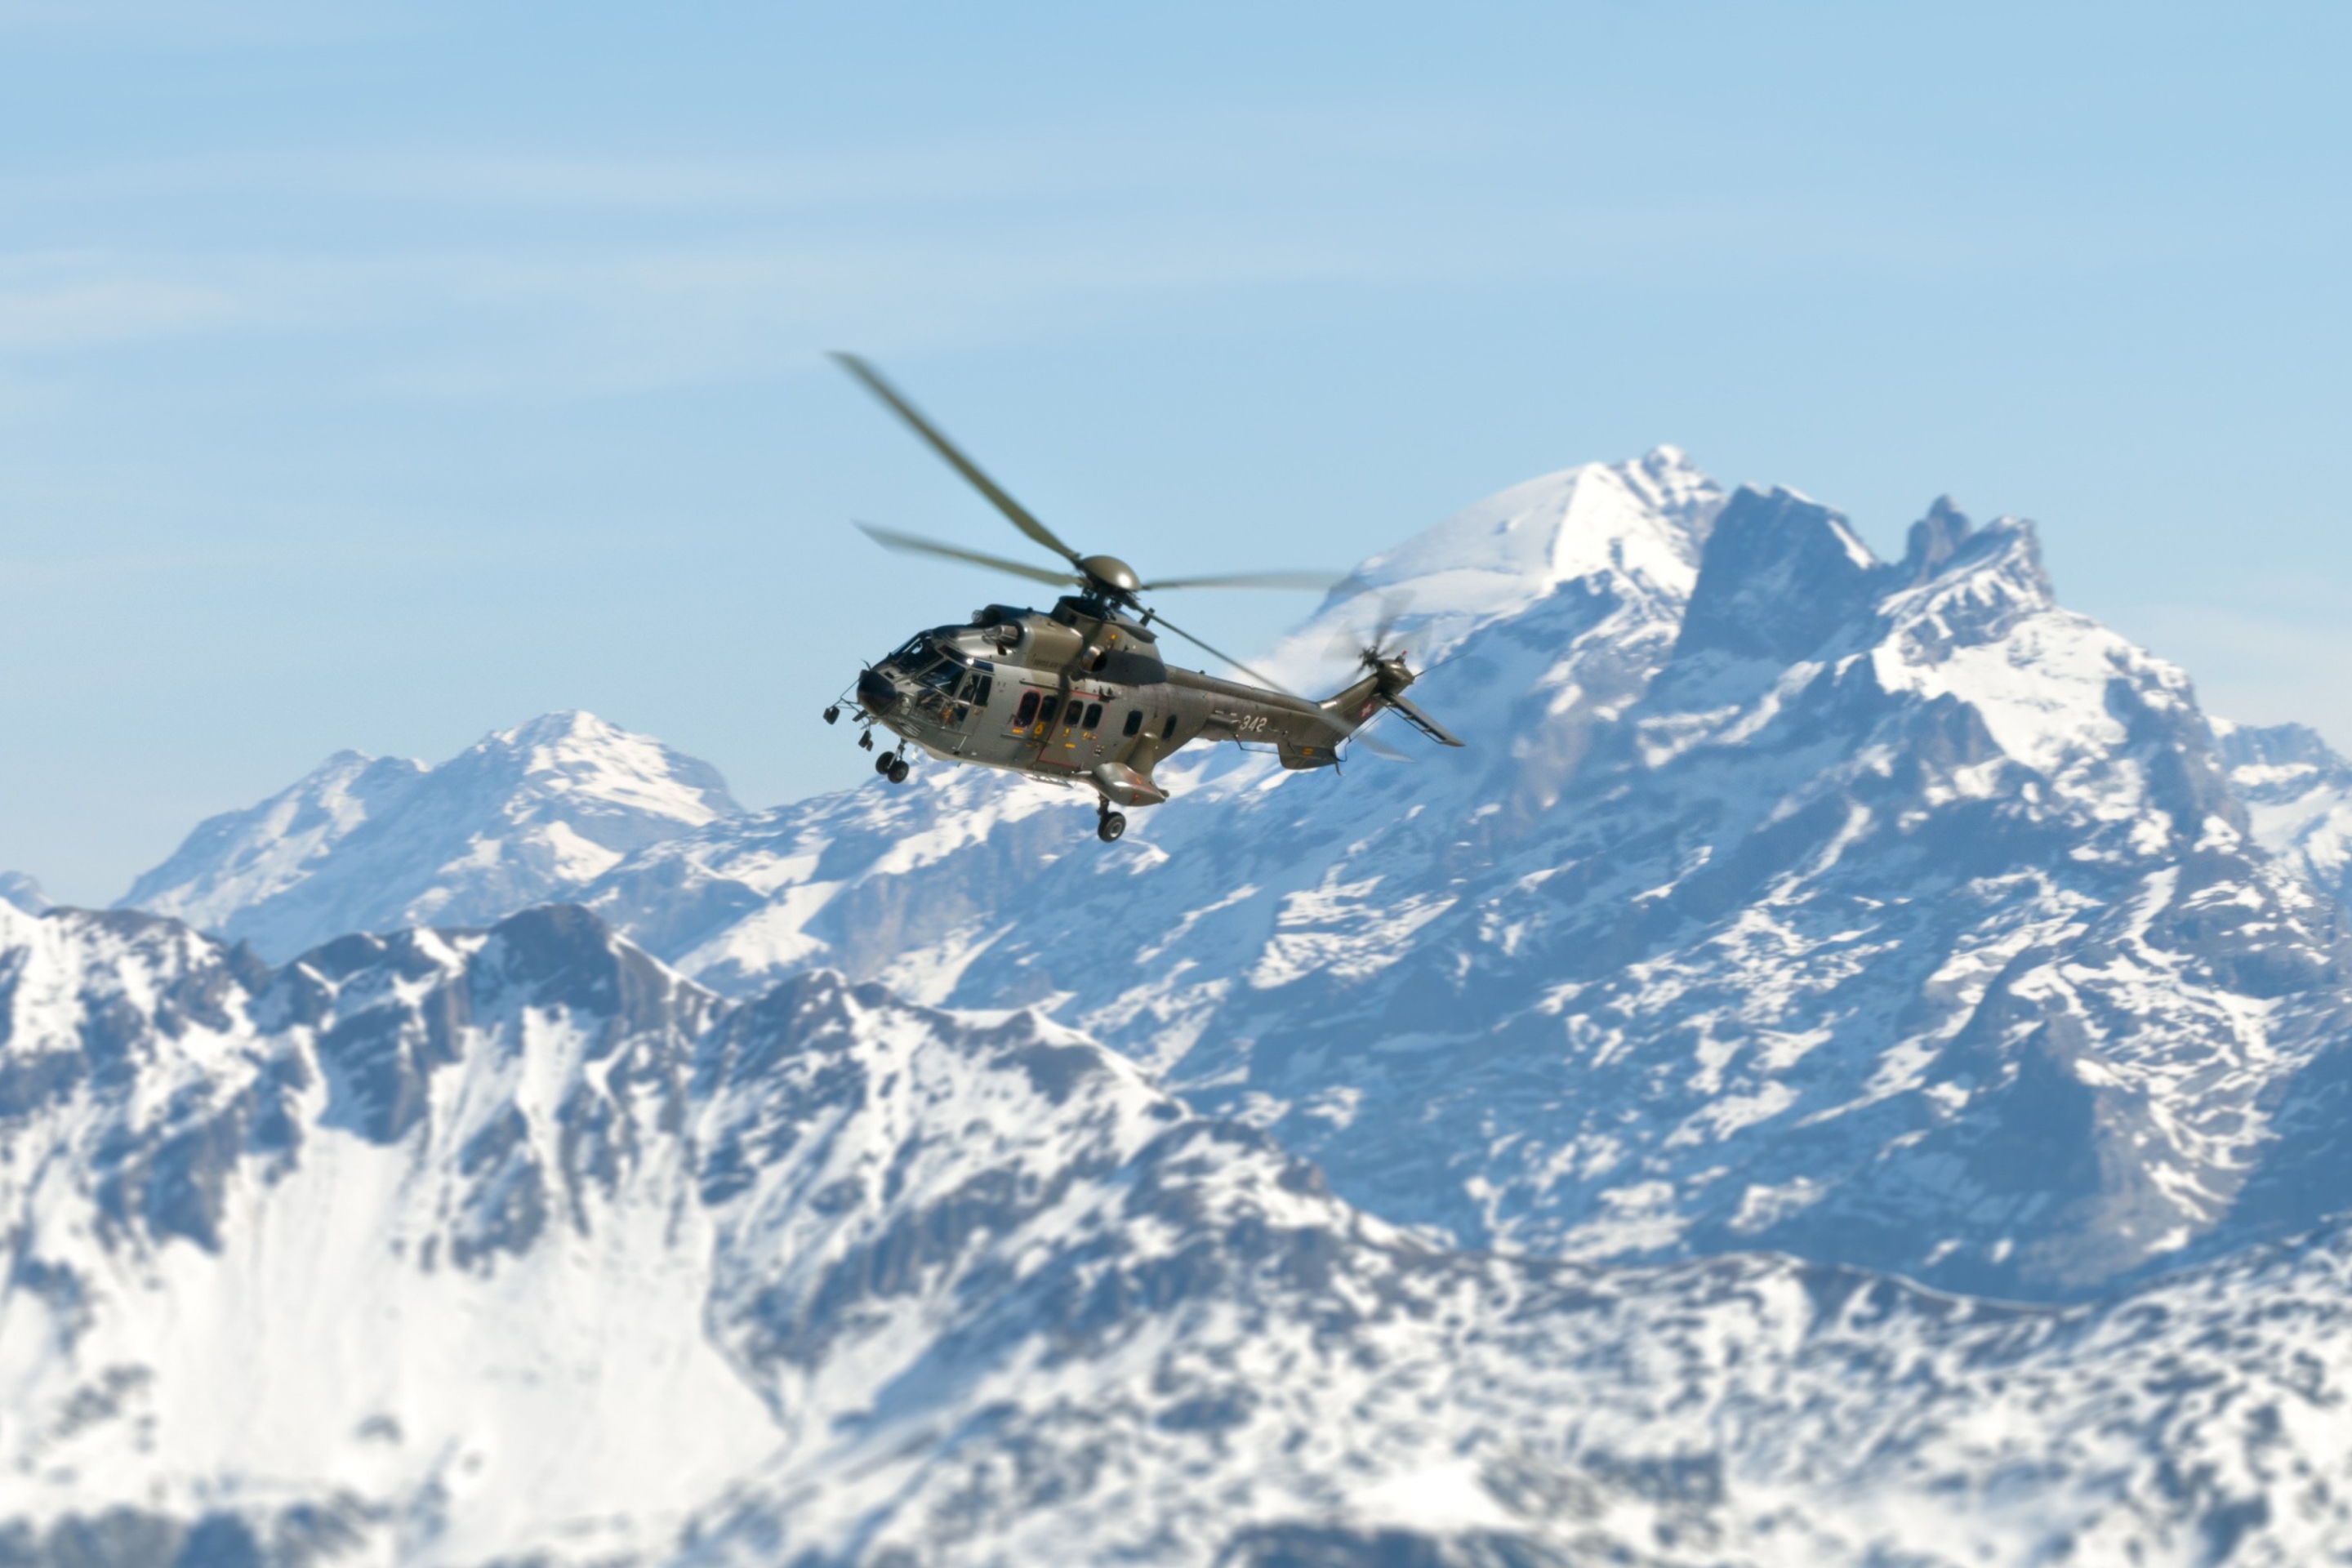 Helicopter Over Snowy Mountains screenshot #1 2880x1920